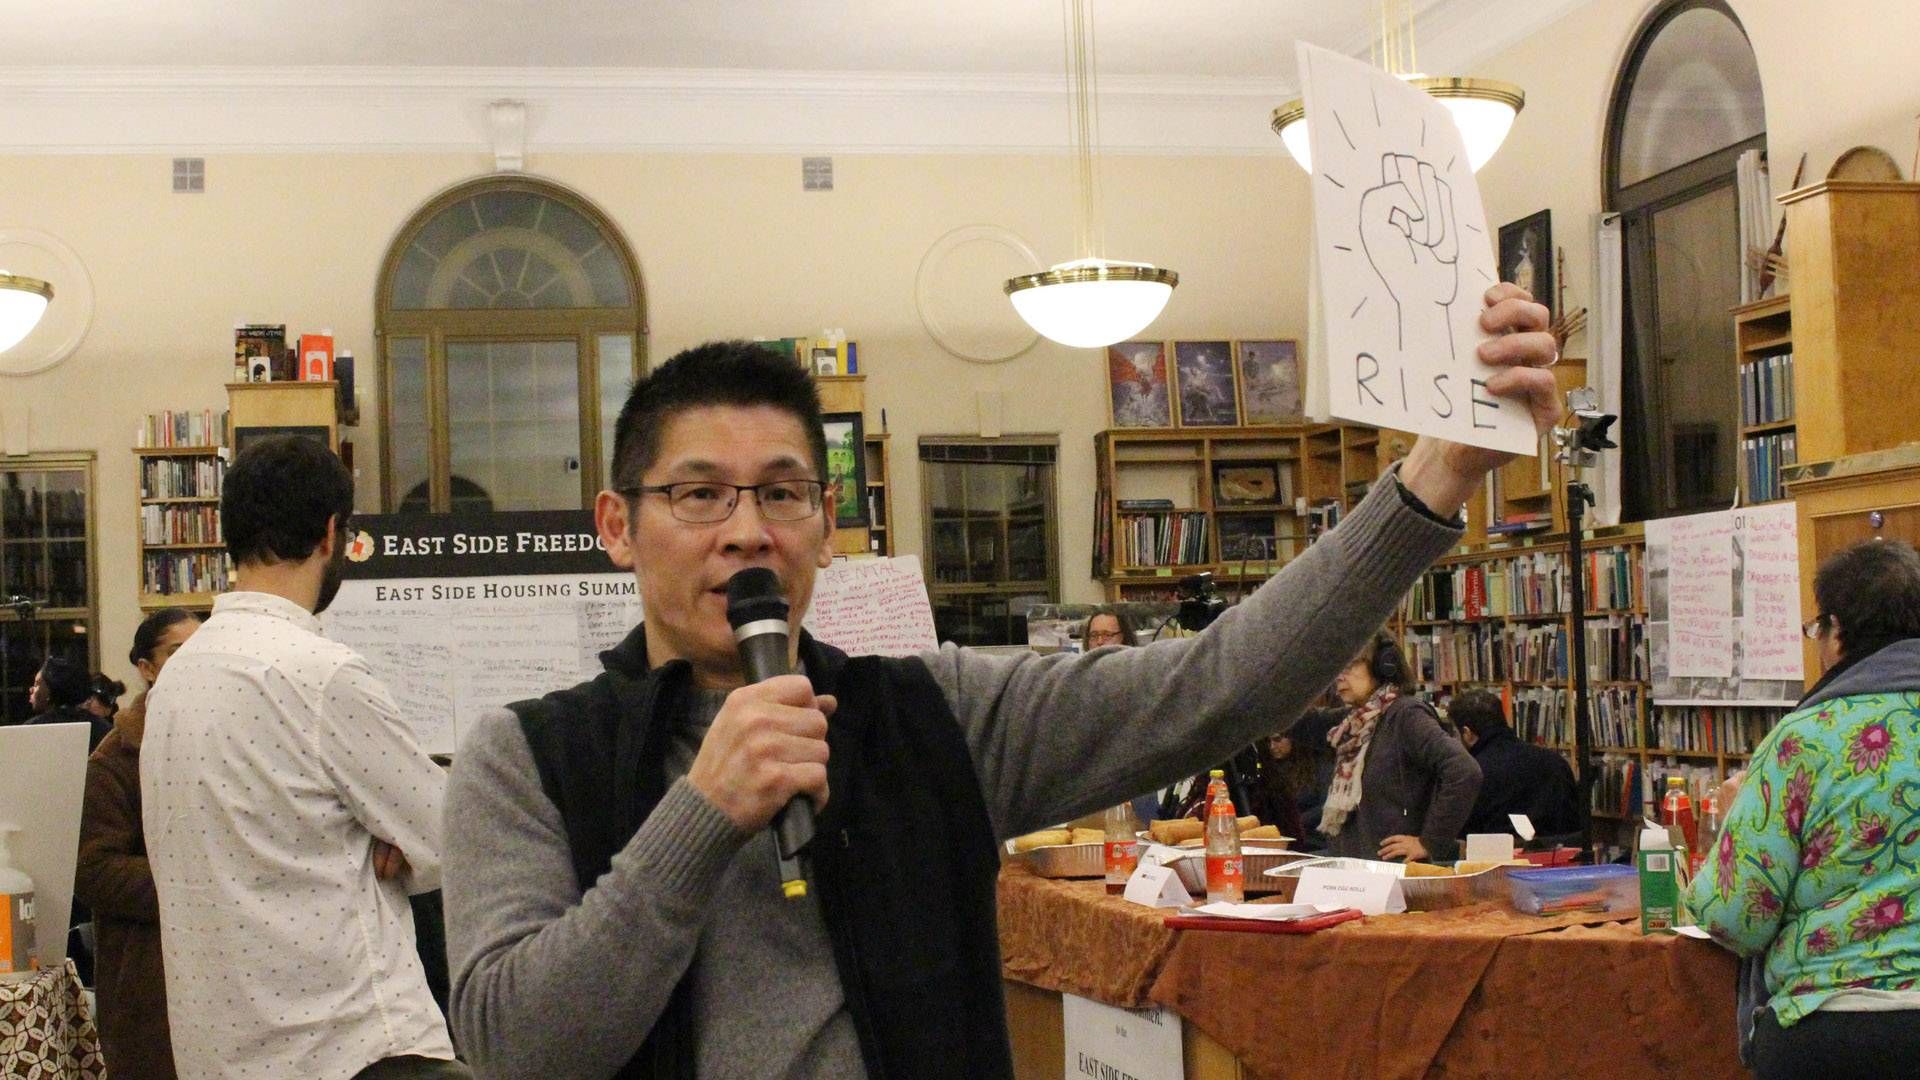 Asian man holds up a sign that reads rise inside of a library